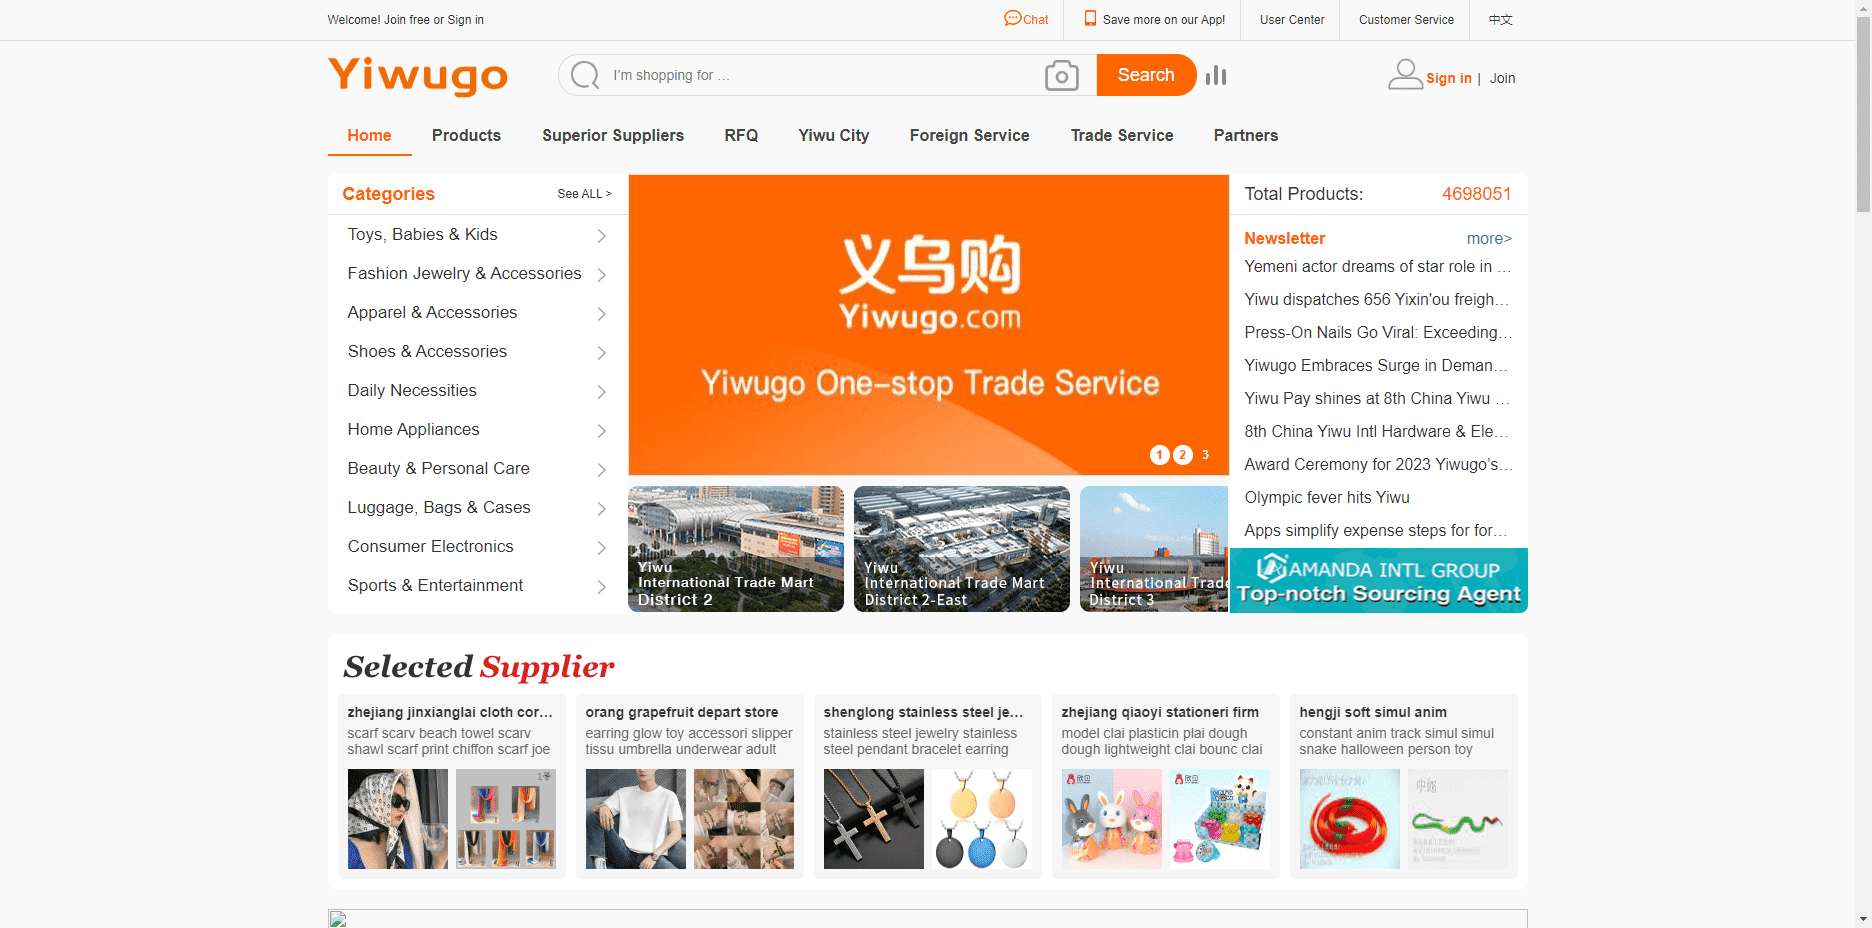 The official website of Yiwugo